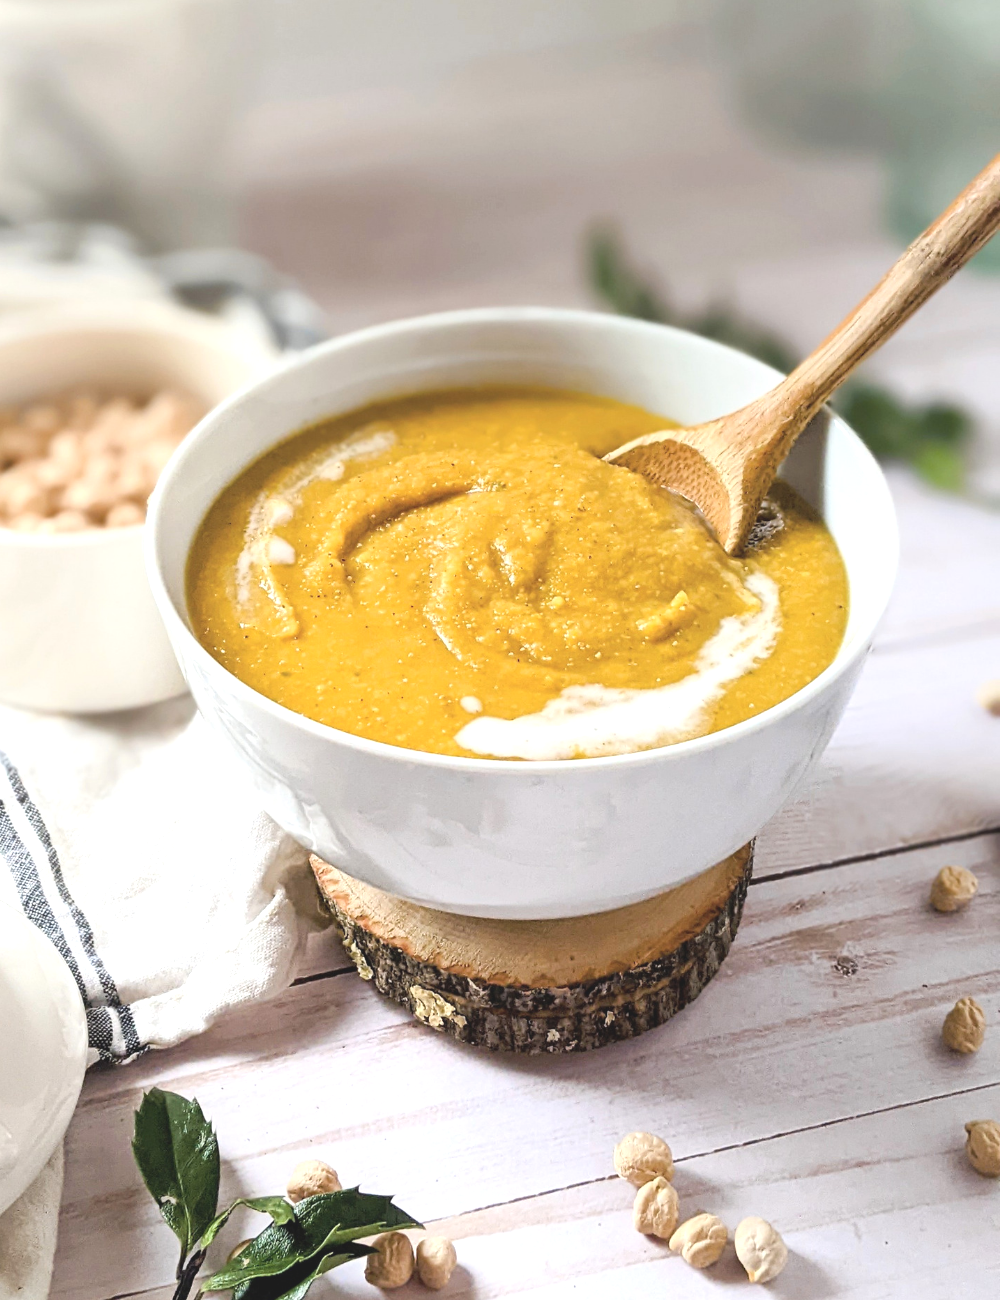 chickpea carrot soup recipe healthy dairy free creamy chickpea soups veganuary lunch ideas recipes for veganuary new vegan recipes